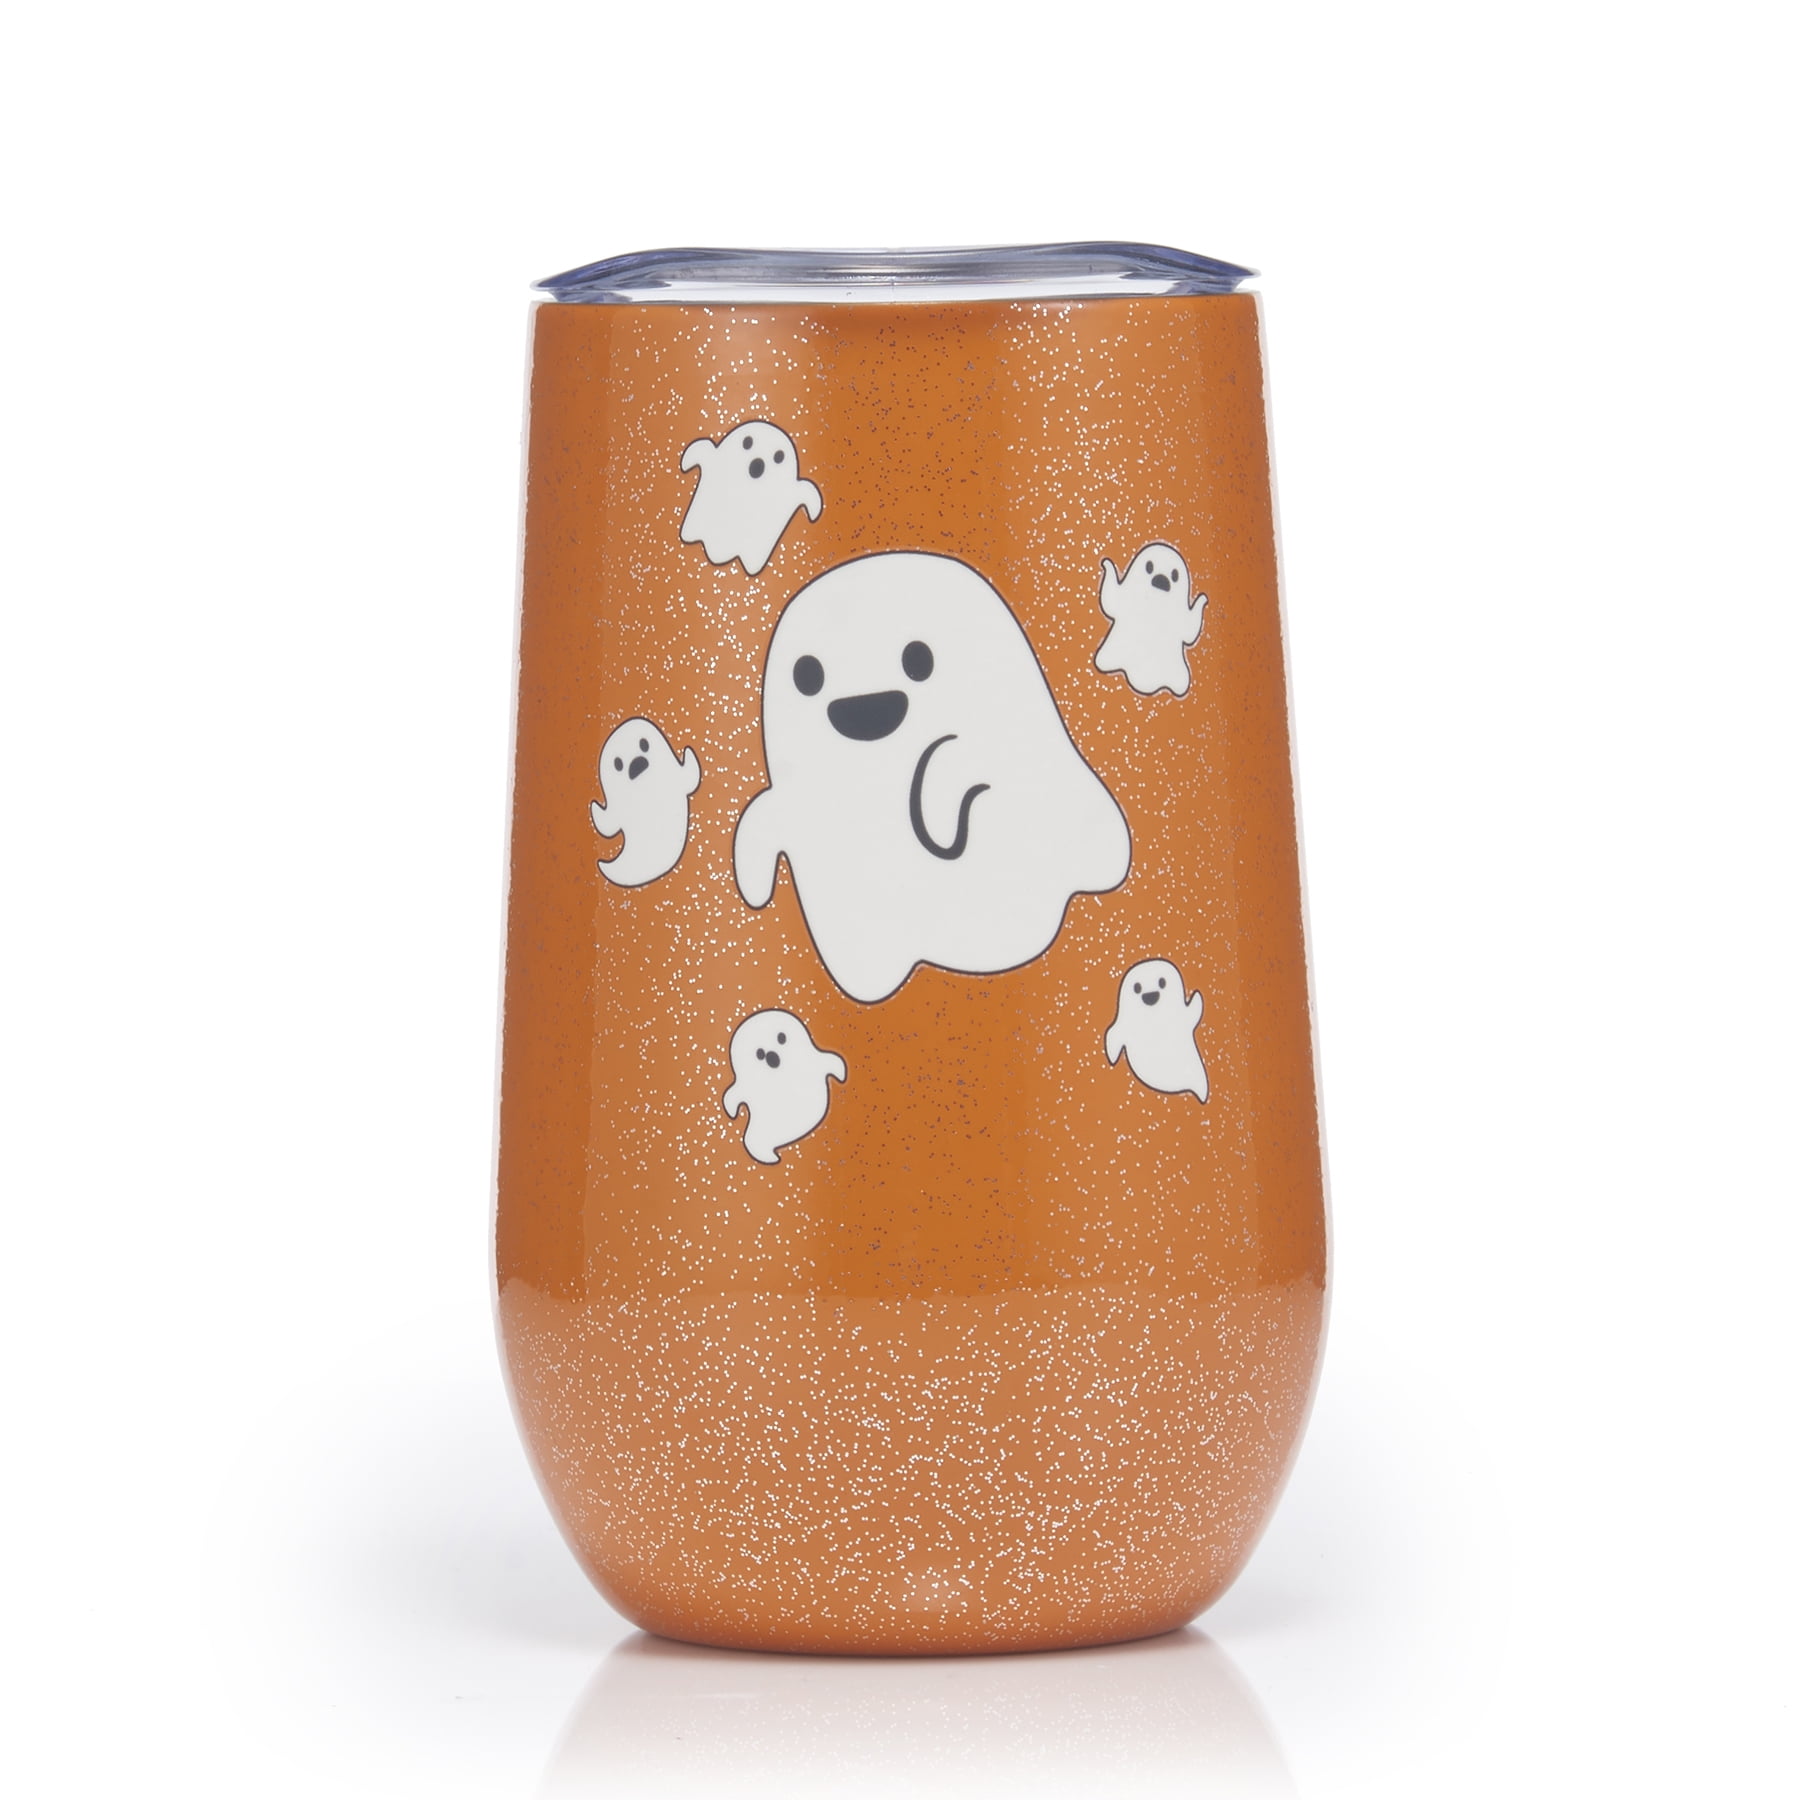 Kids Glittered 12 Oz Tumbler With Straw. Halloween Themed